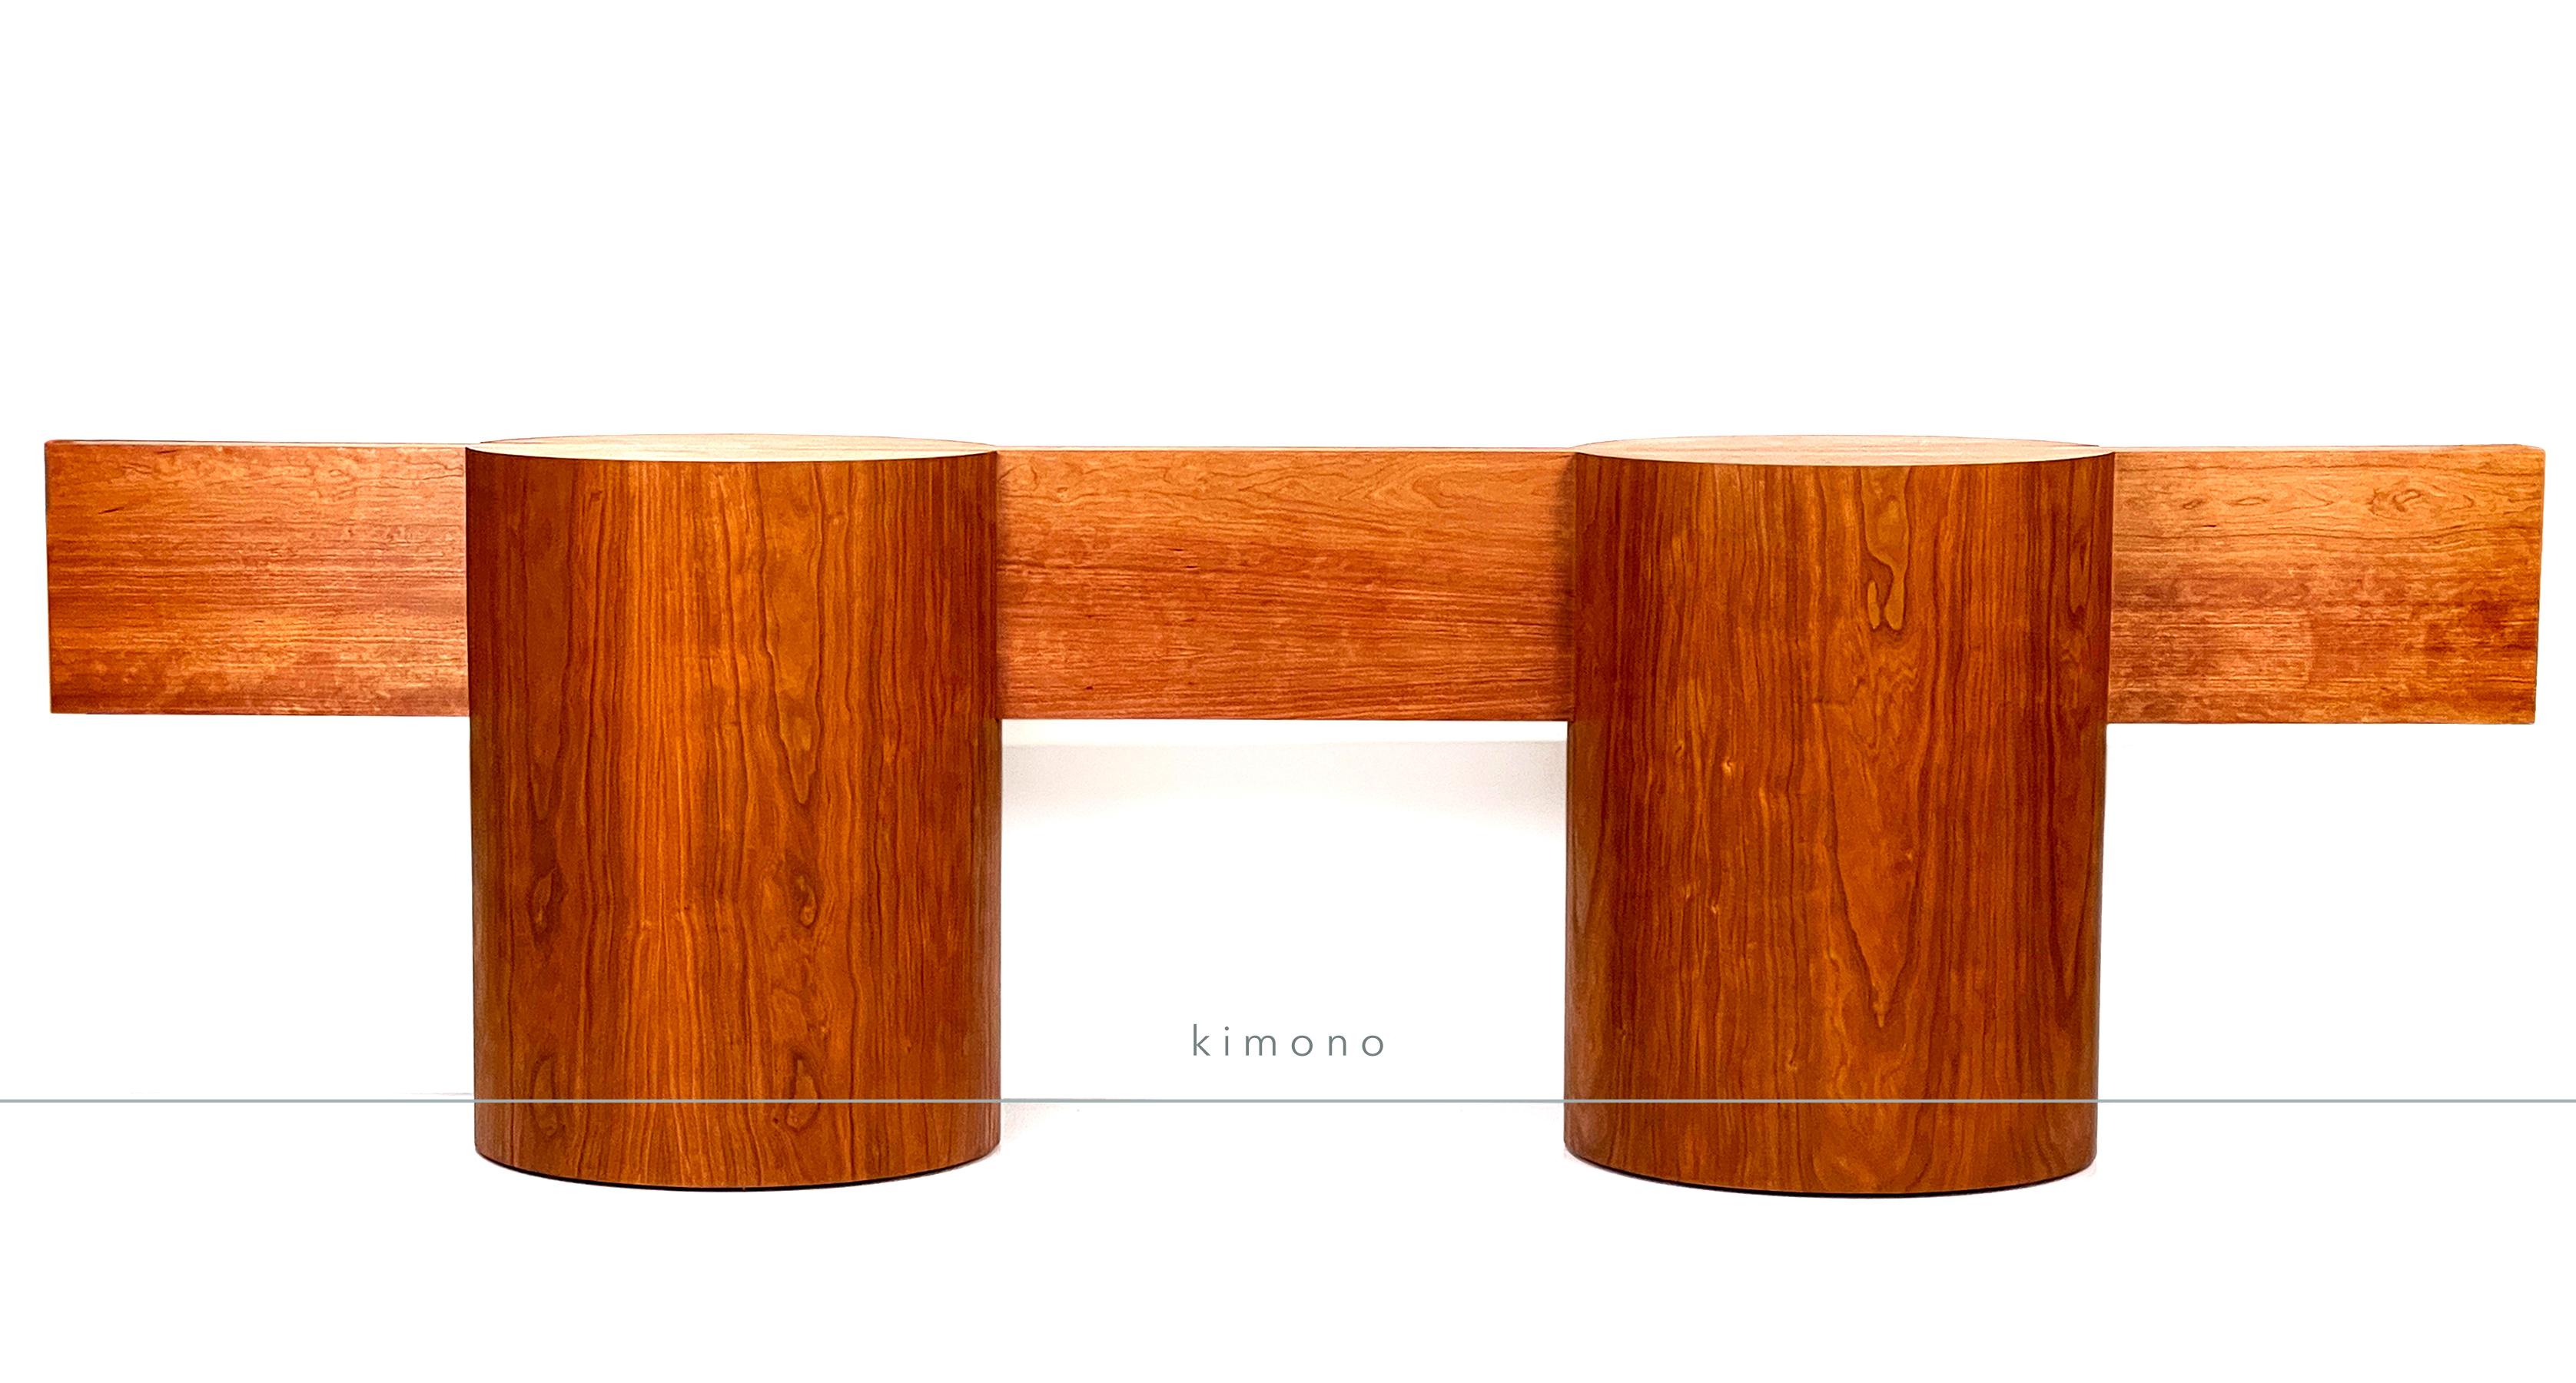 Anglo-Japanese William Earle's classic KIMONO pedestal table available here for 30 days only.